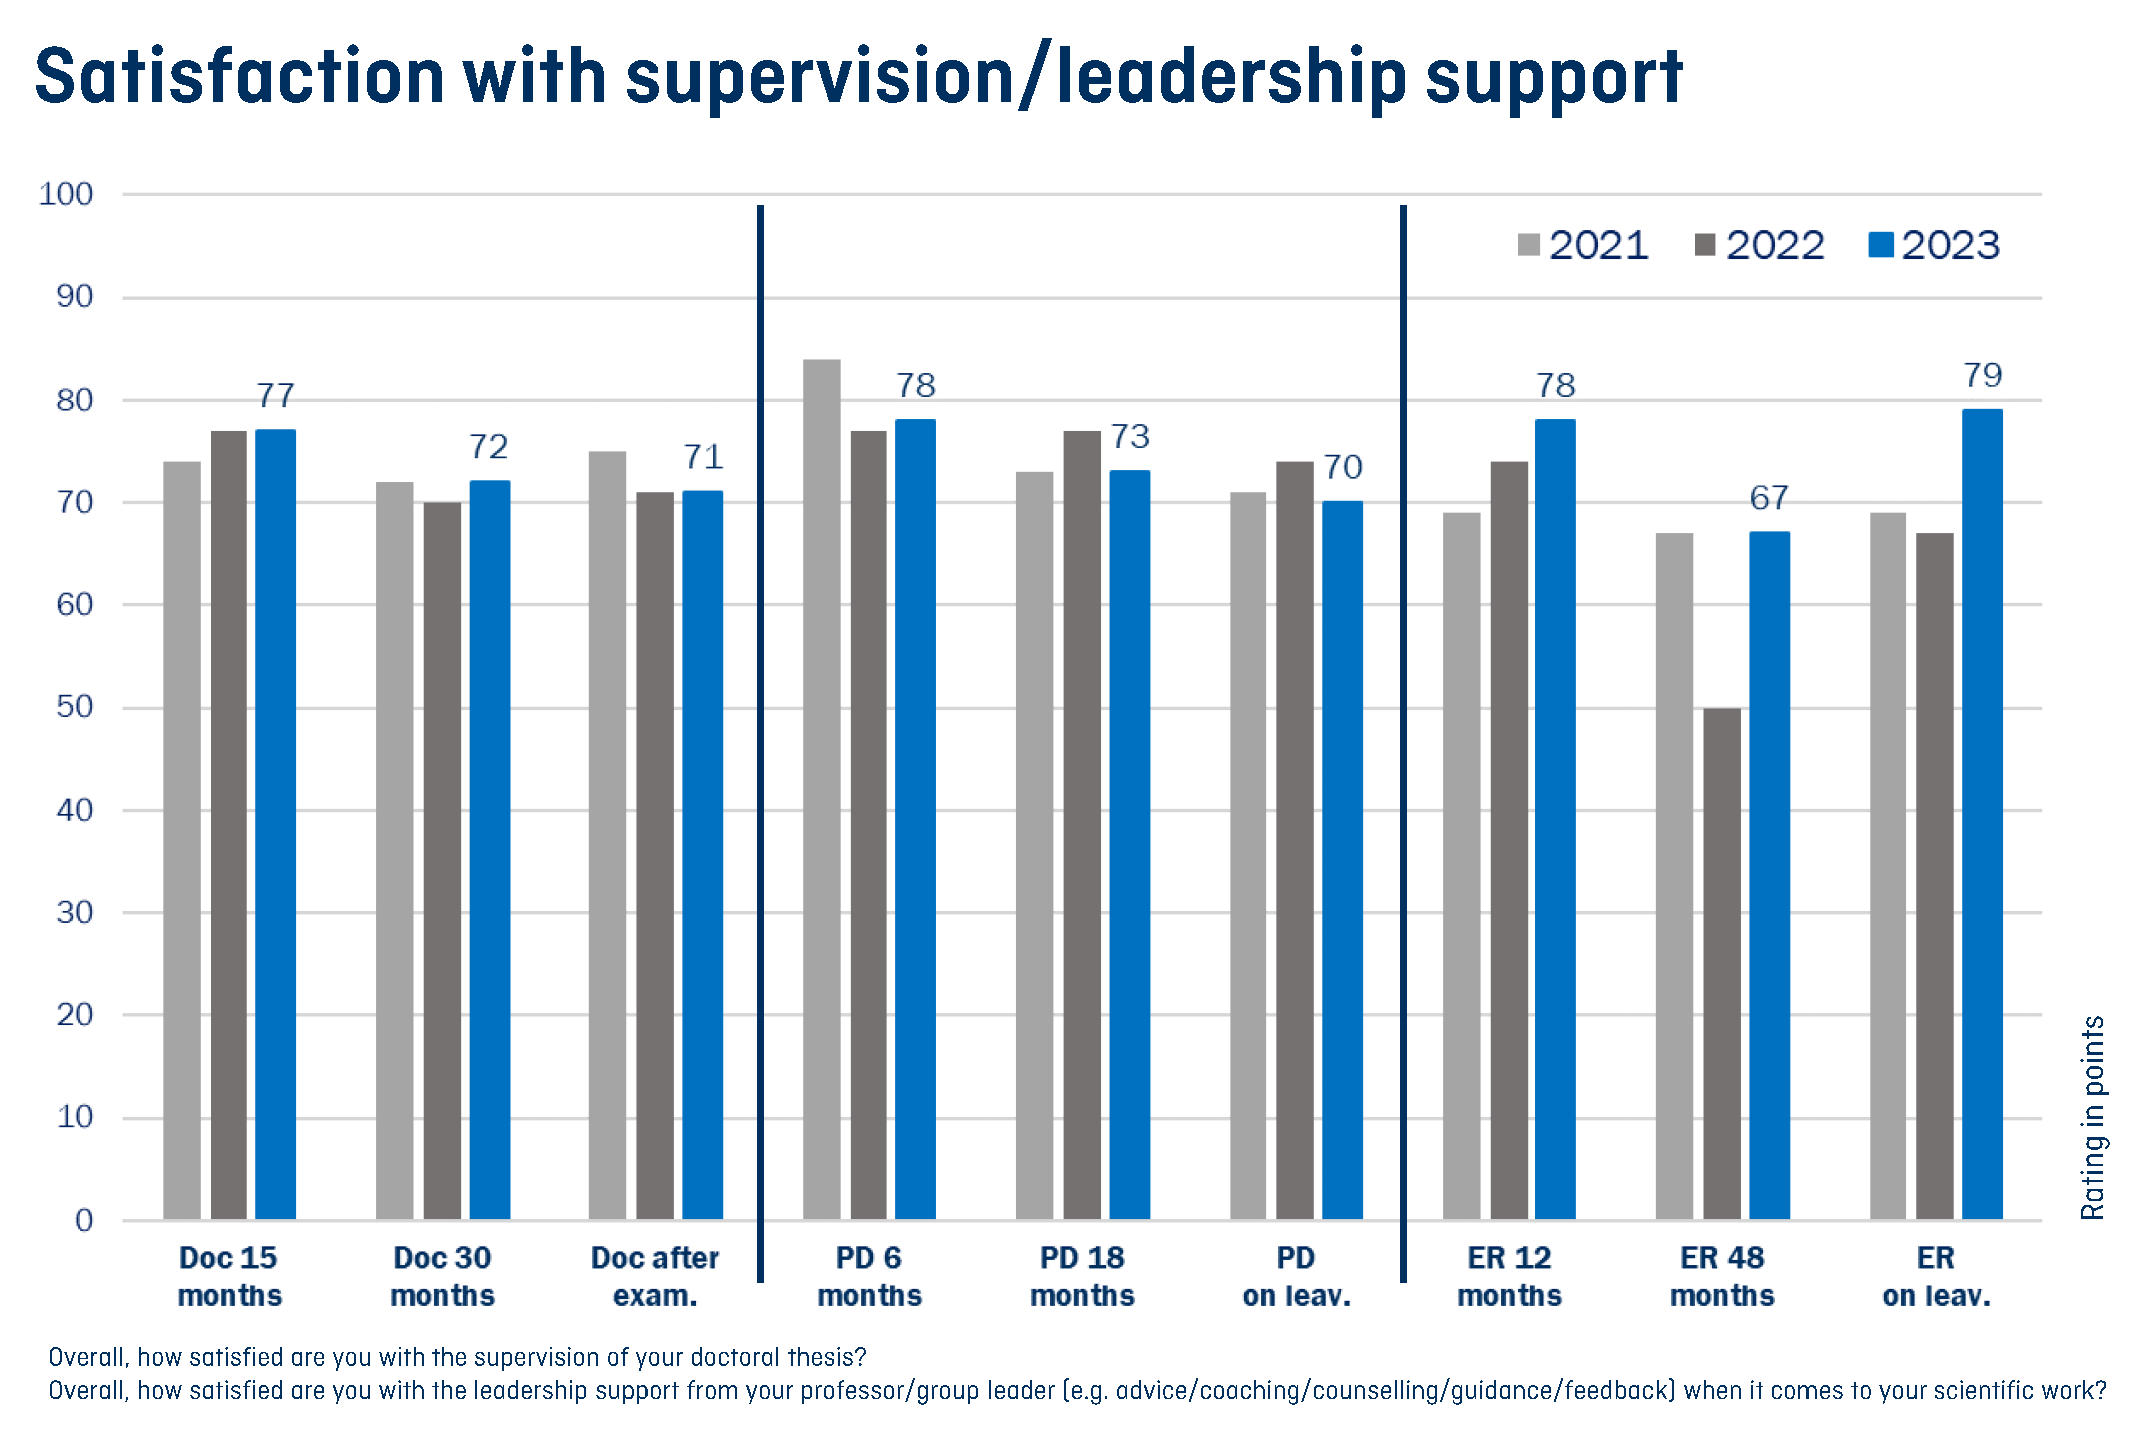 Enlarged view: Chart showing satisfaction with supervision in 2021, 2022 and 2023 for different employment positions.